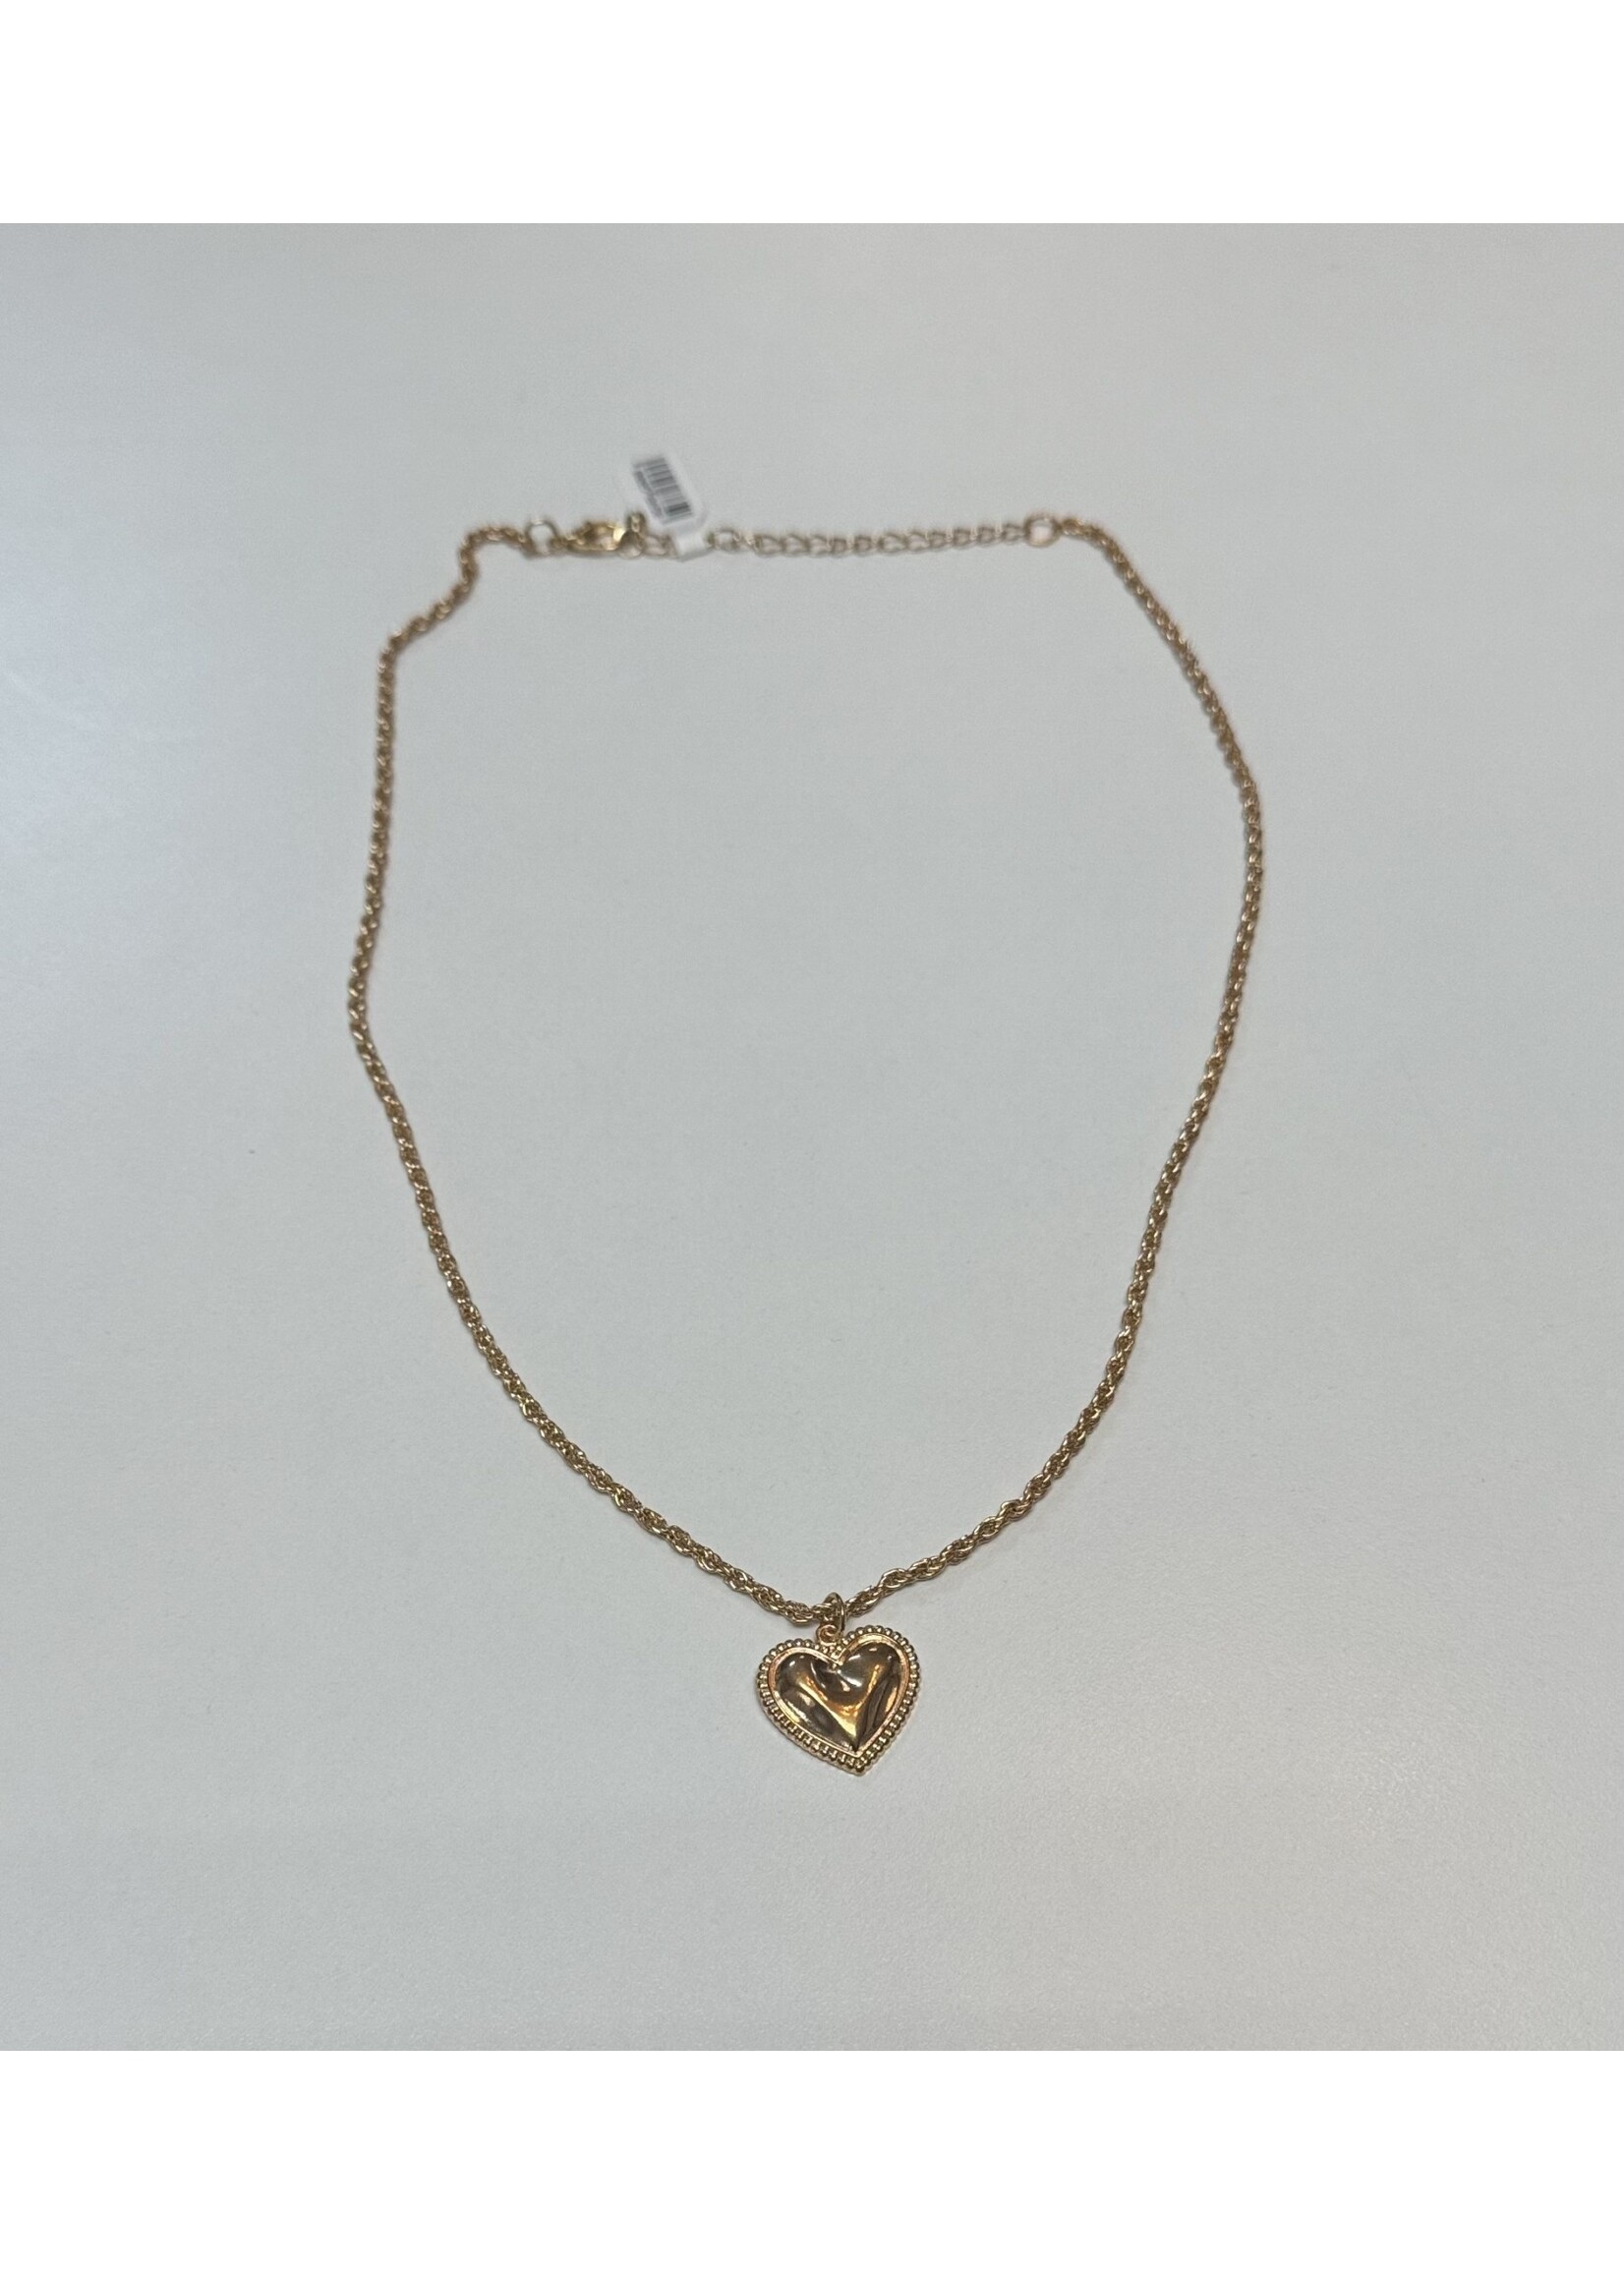 Gold Plated Necklace w/Heart Pendant